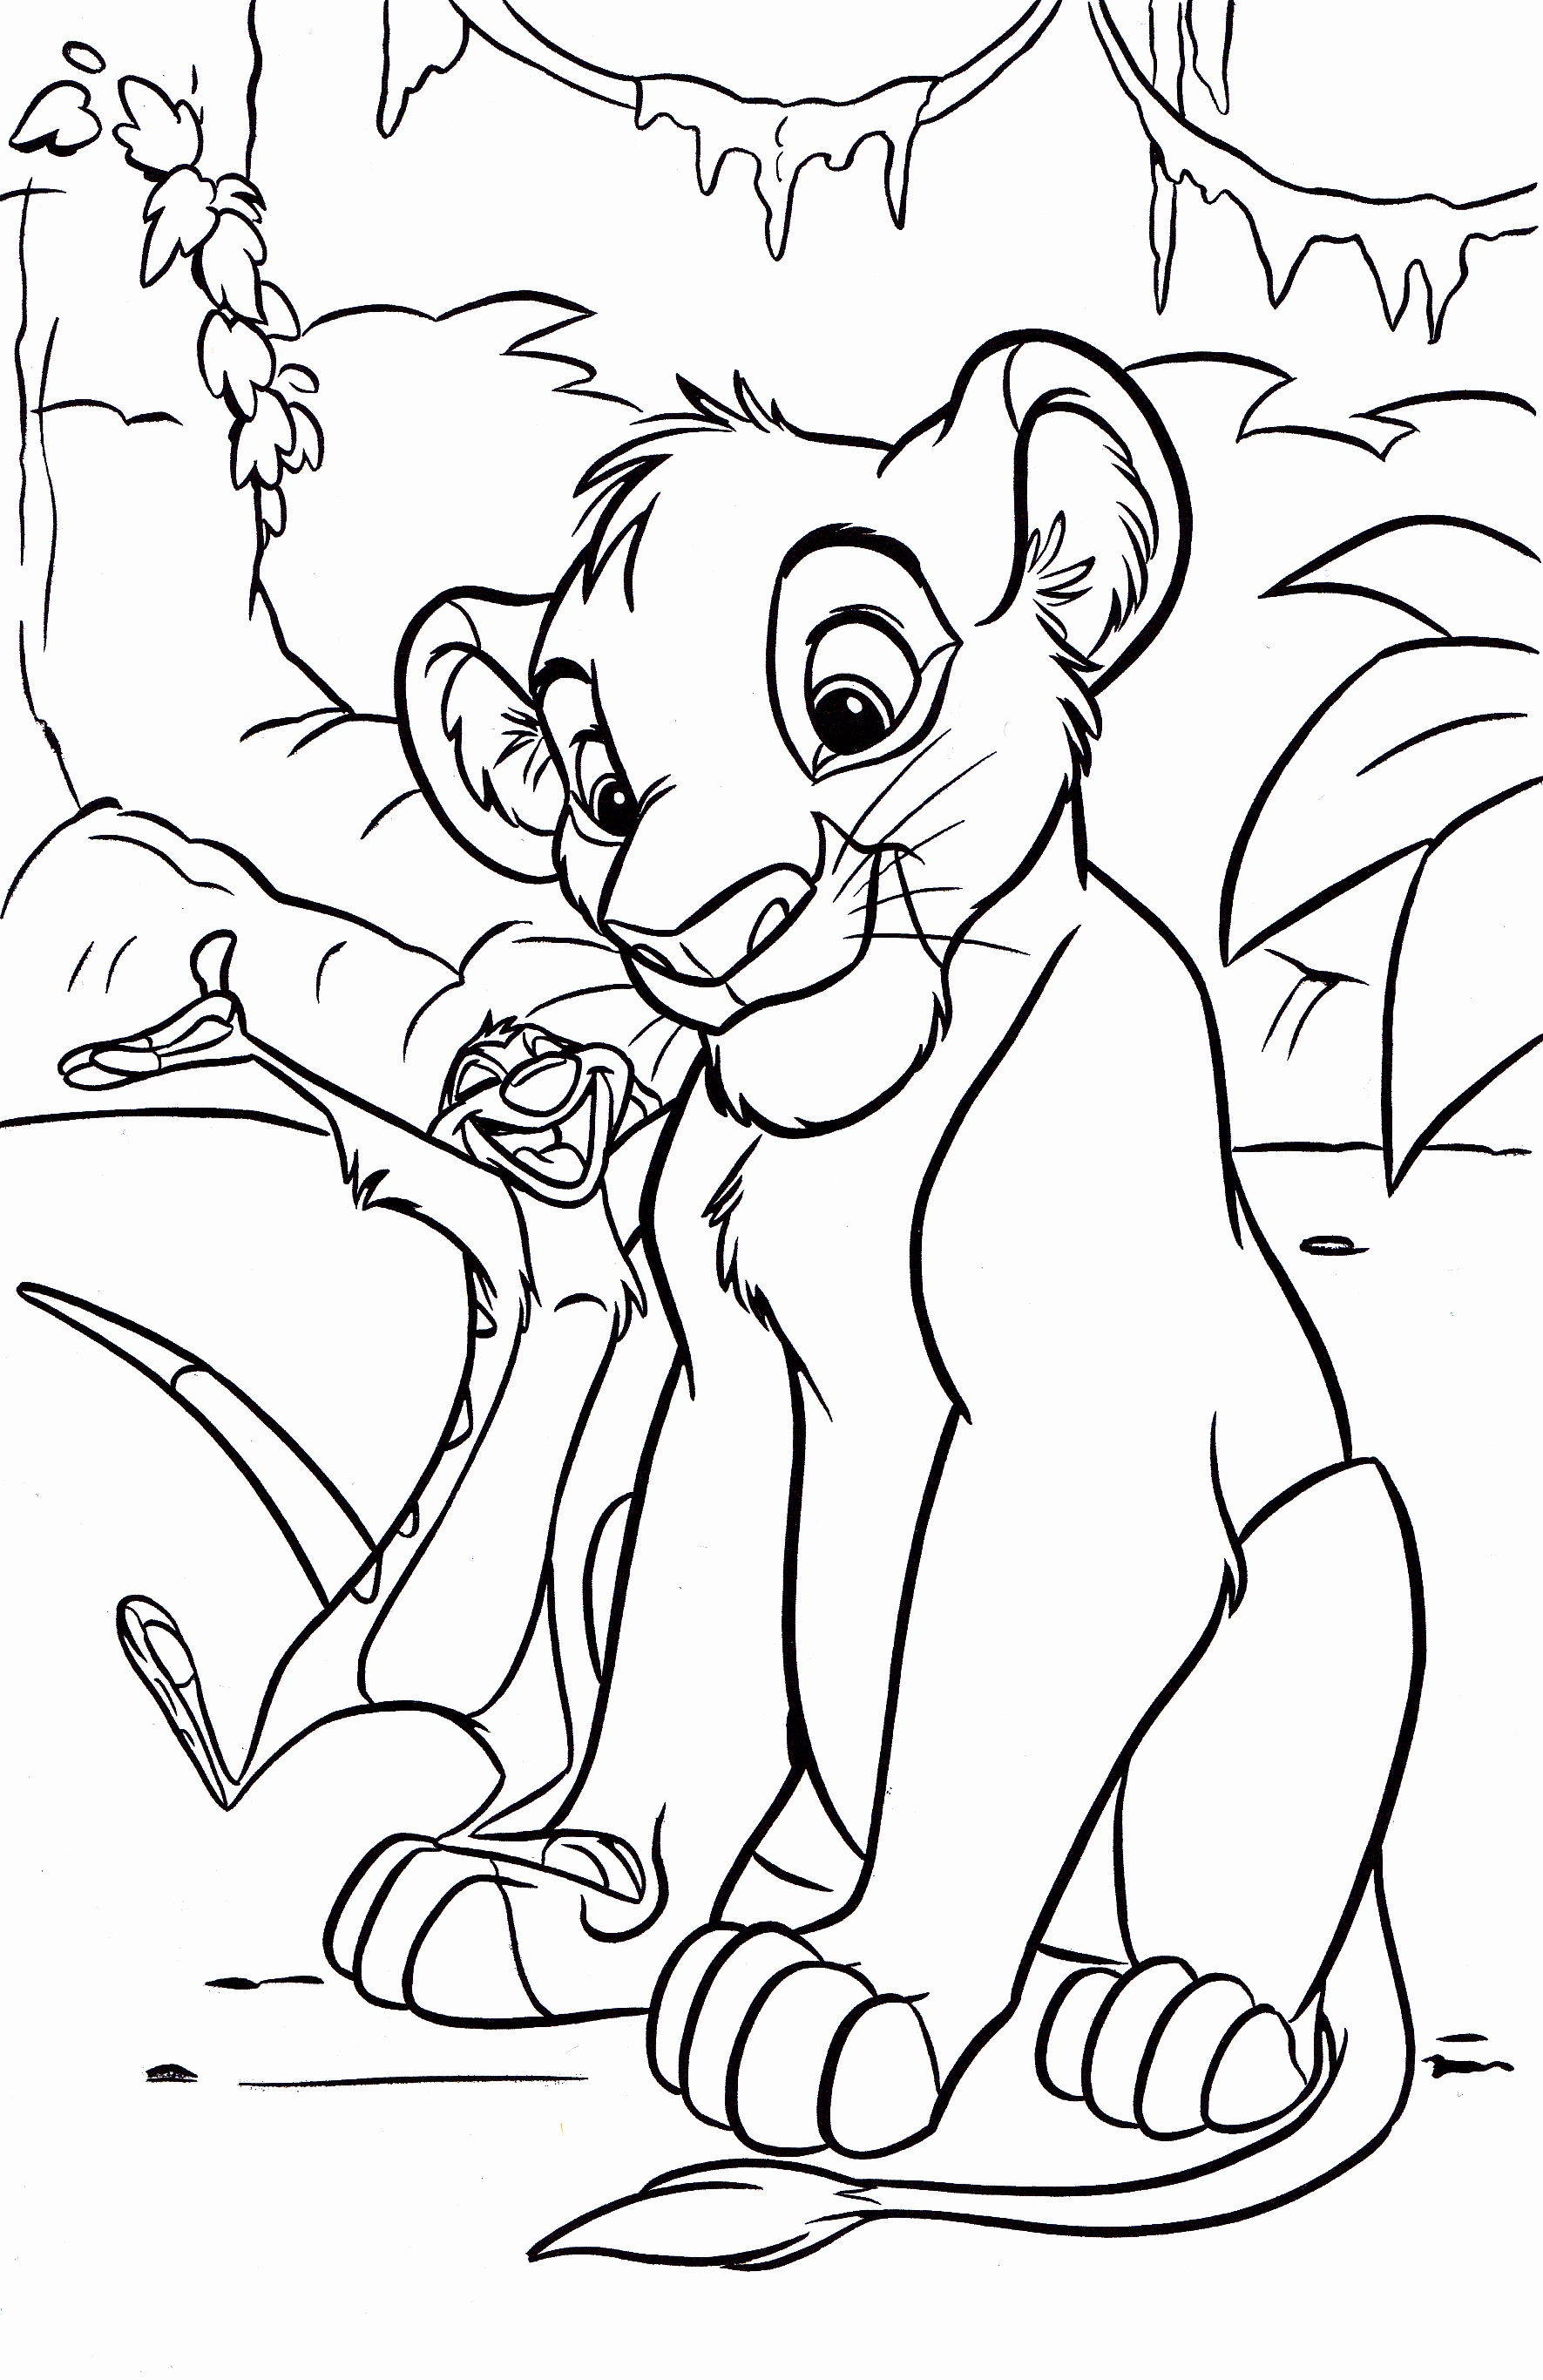 Download Free Printable Simba Coloring Pages For Kids